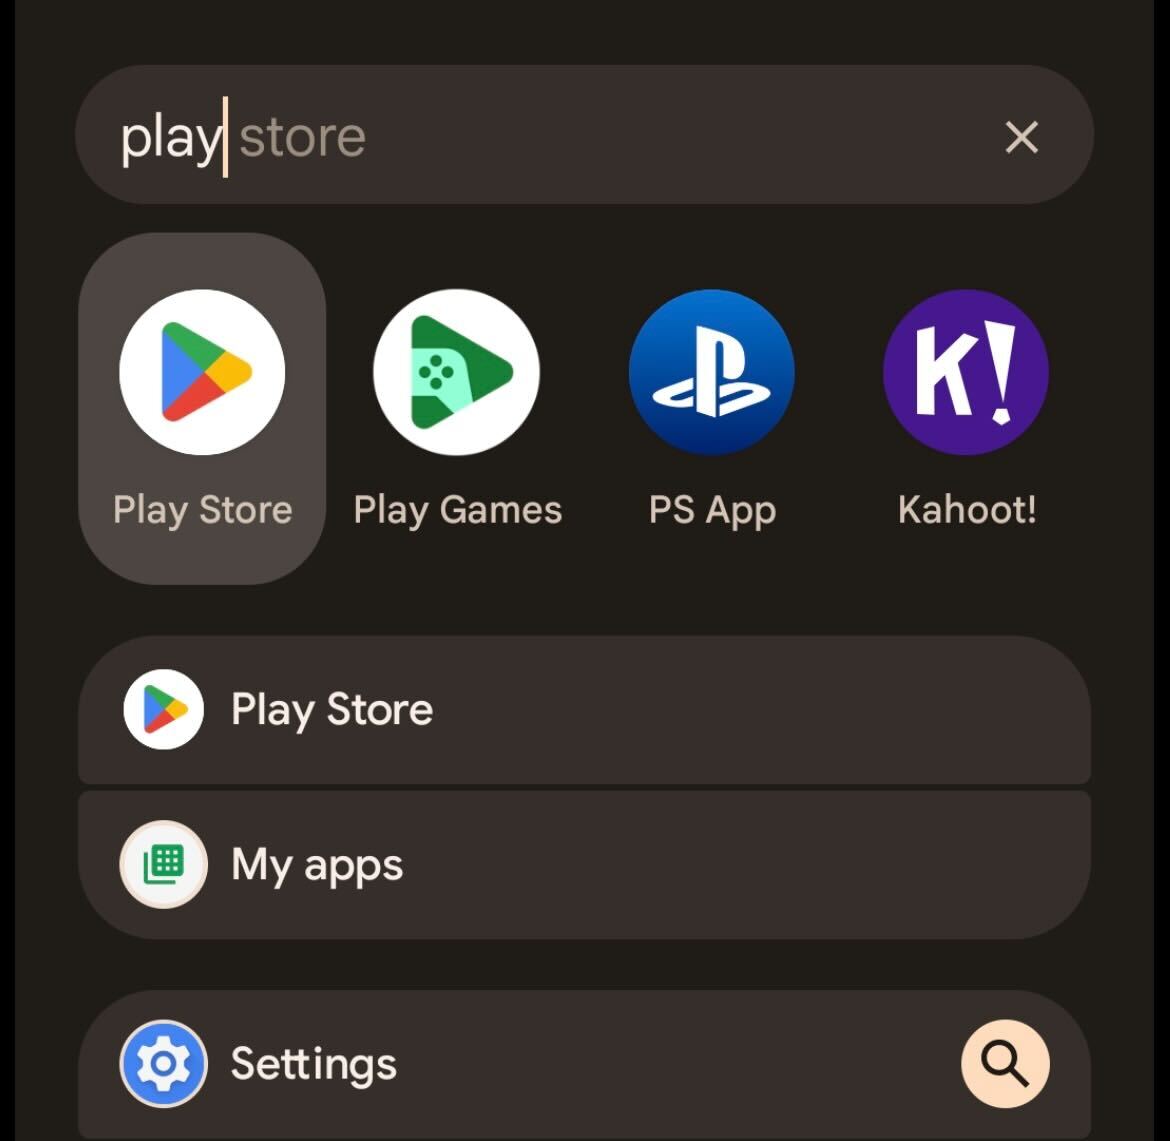 How to Unlock Apps on Android?